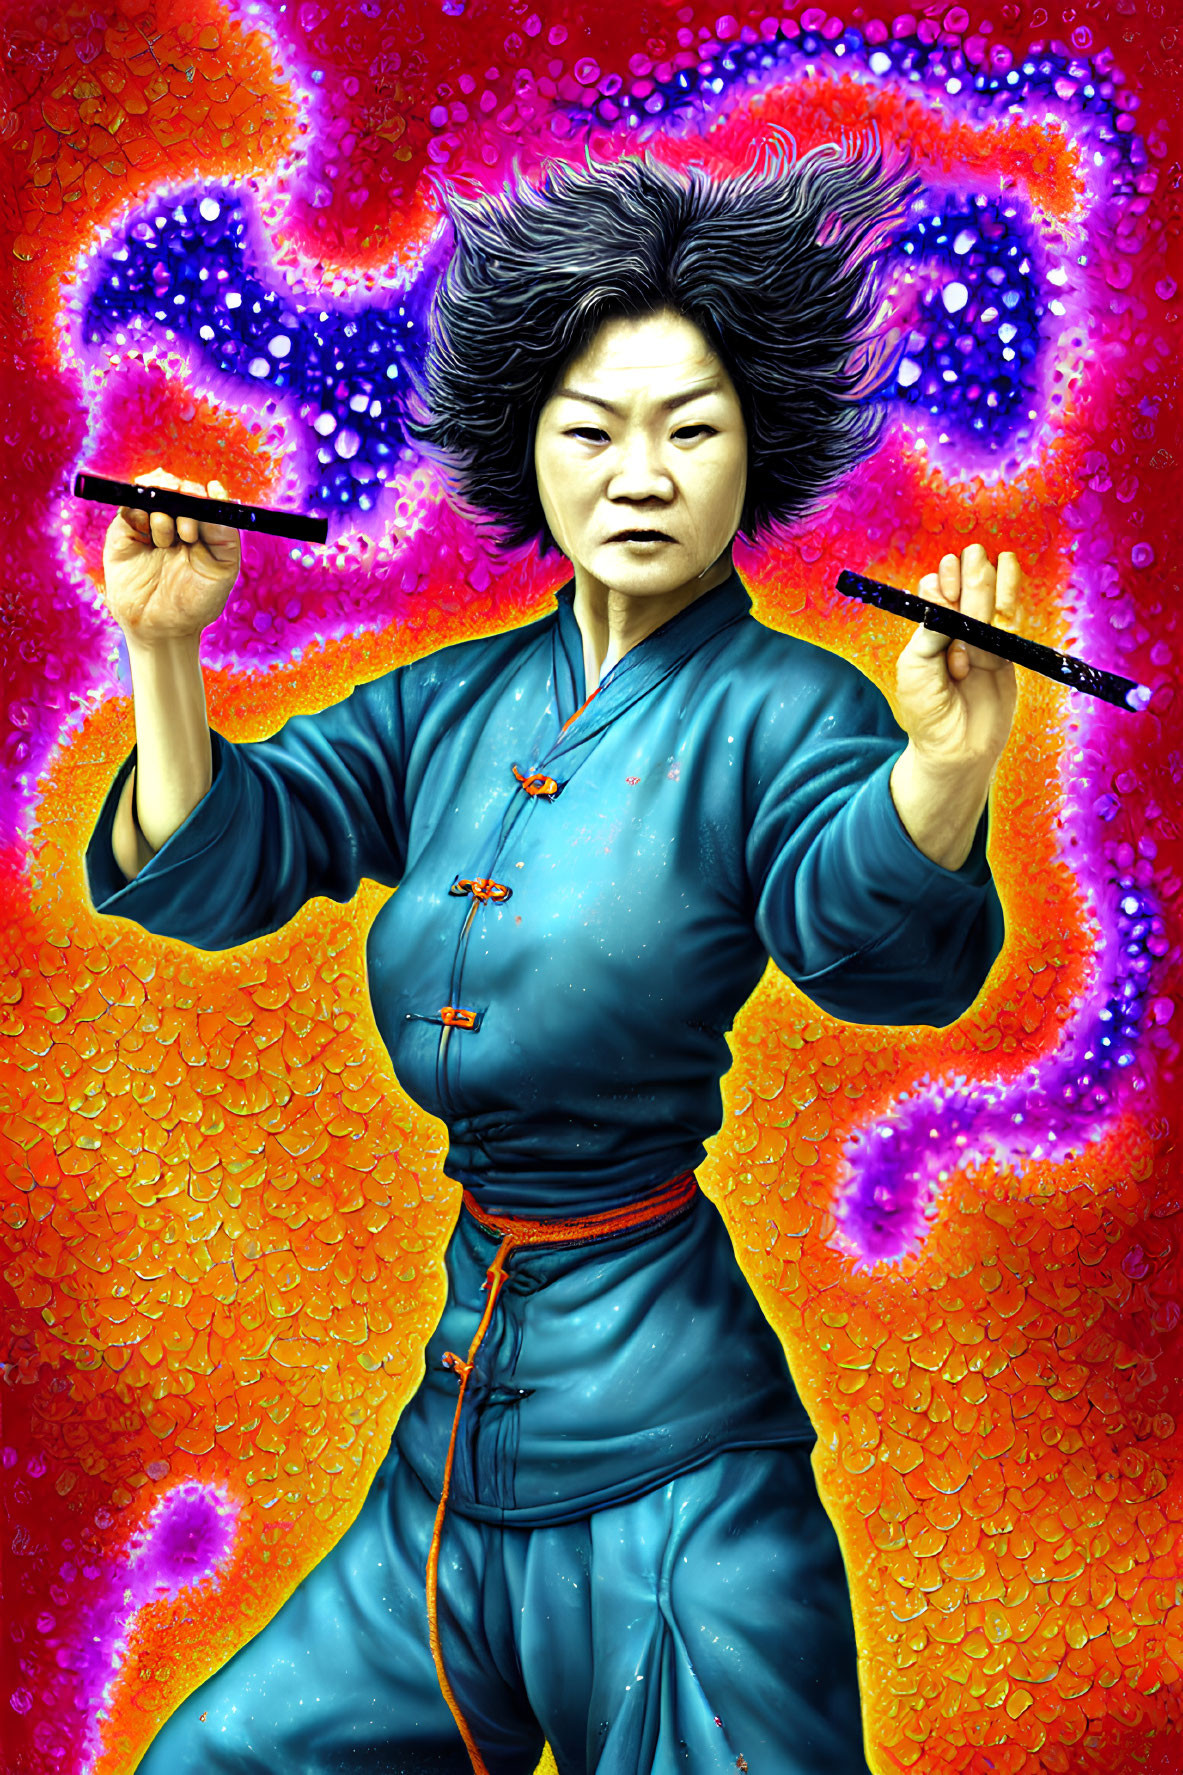 Colorful digital art: Woman in blue traditional attire with drumsticks, fiery background.